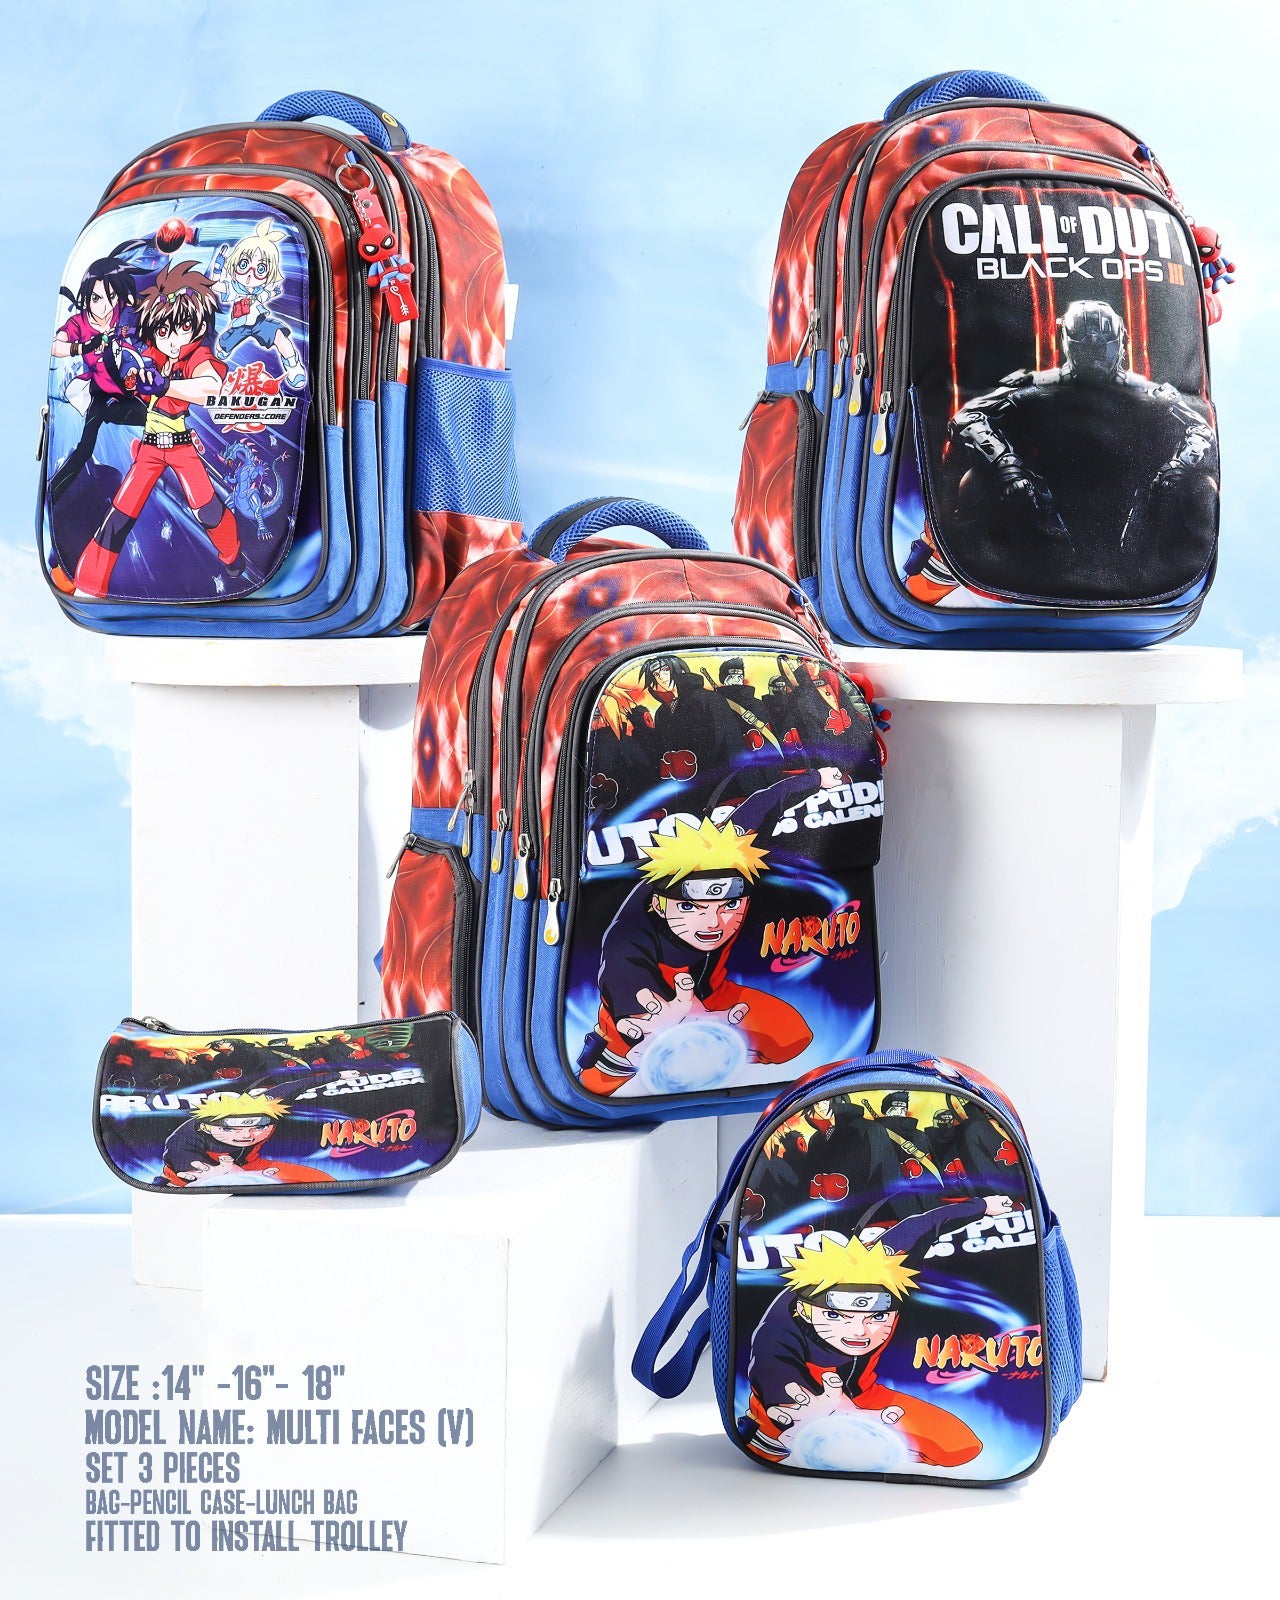 Multi Faces Naruto II Bag For Girls 16 INCH